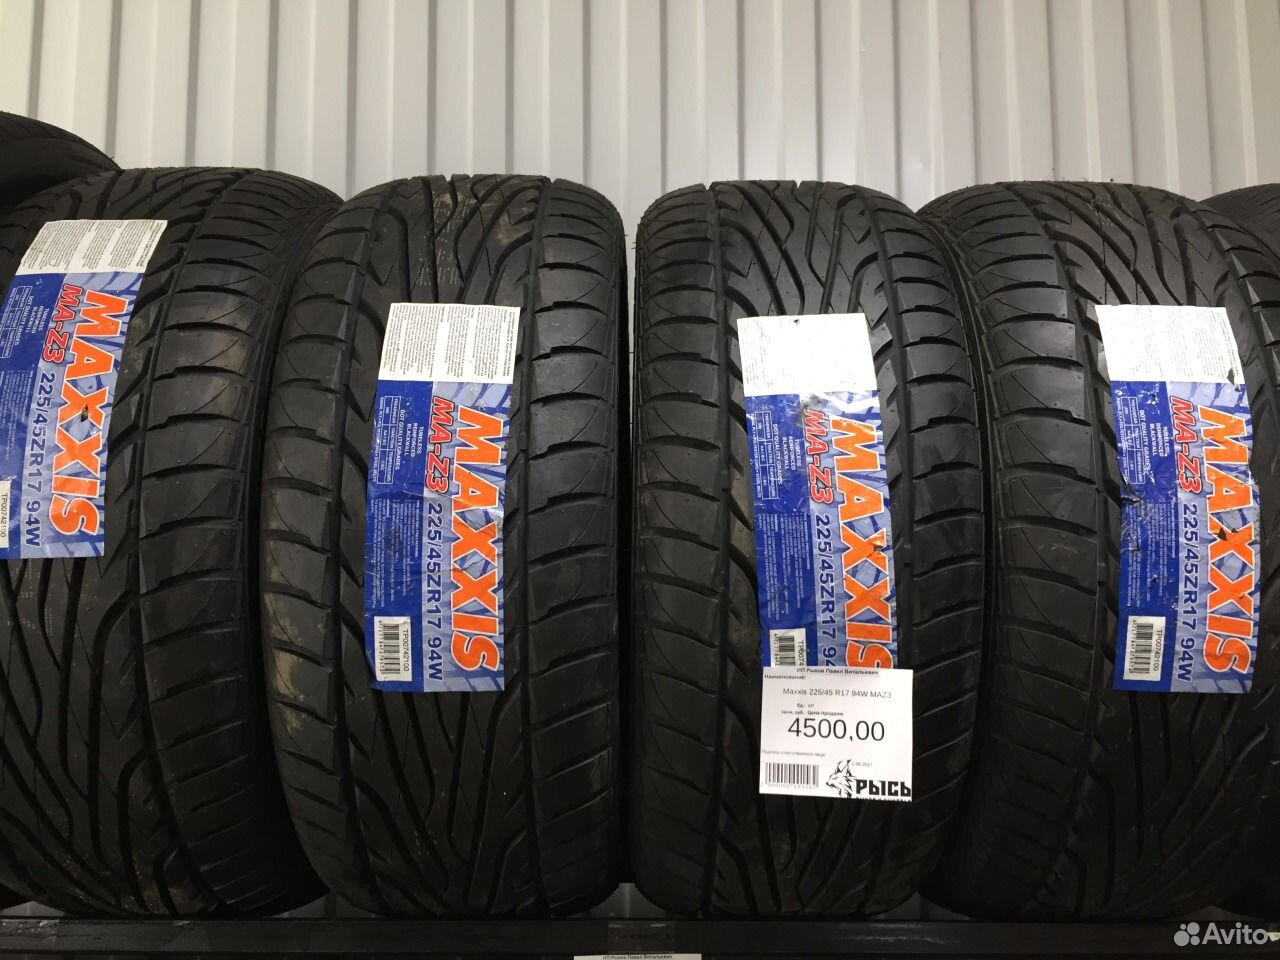 225/45r17 Maxxis Victra ma-z1 94w. Maxxis 225 45 r17 лето. Maxxis 205 50 17 лето. Presa 225 45 r17. Резина 225 50 r17 лето